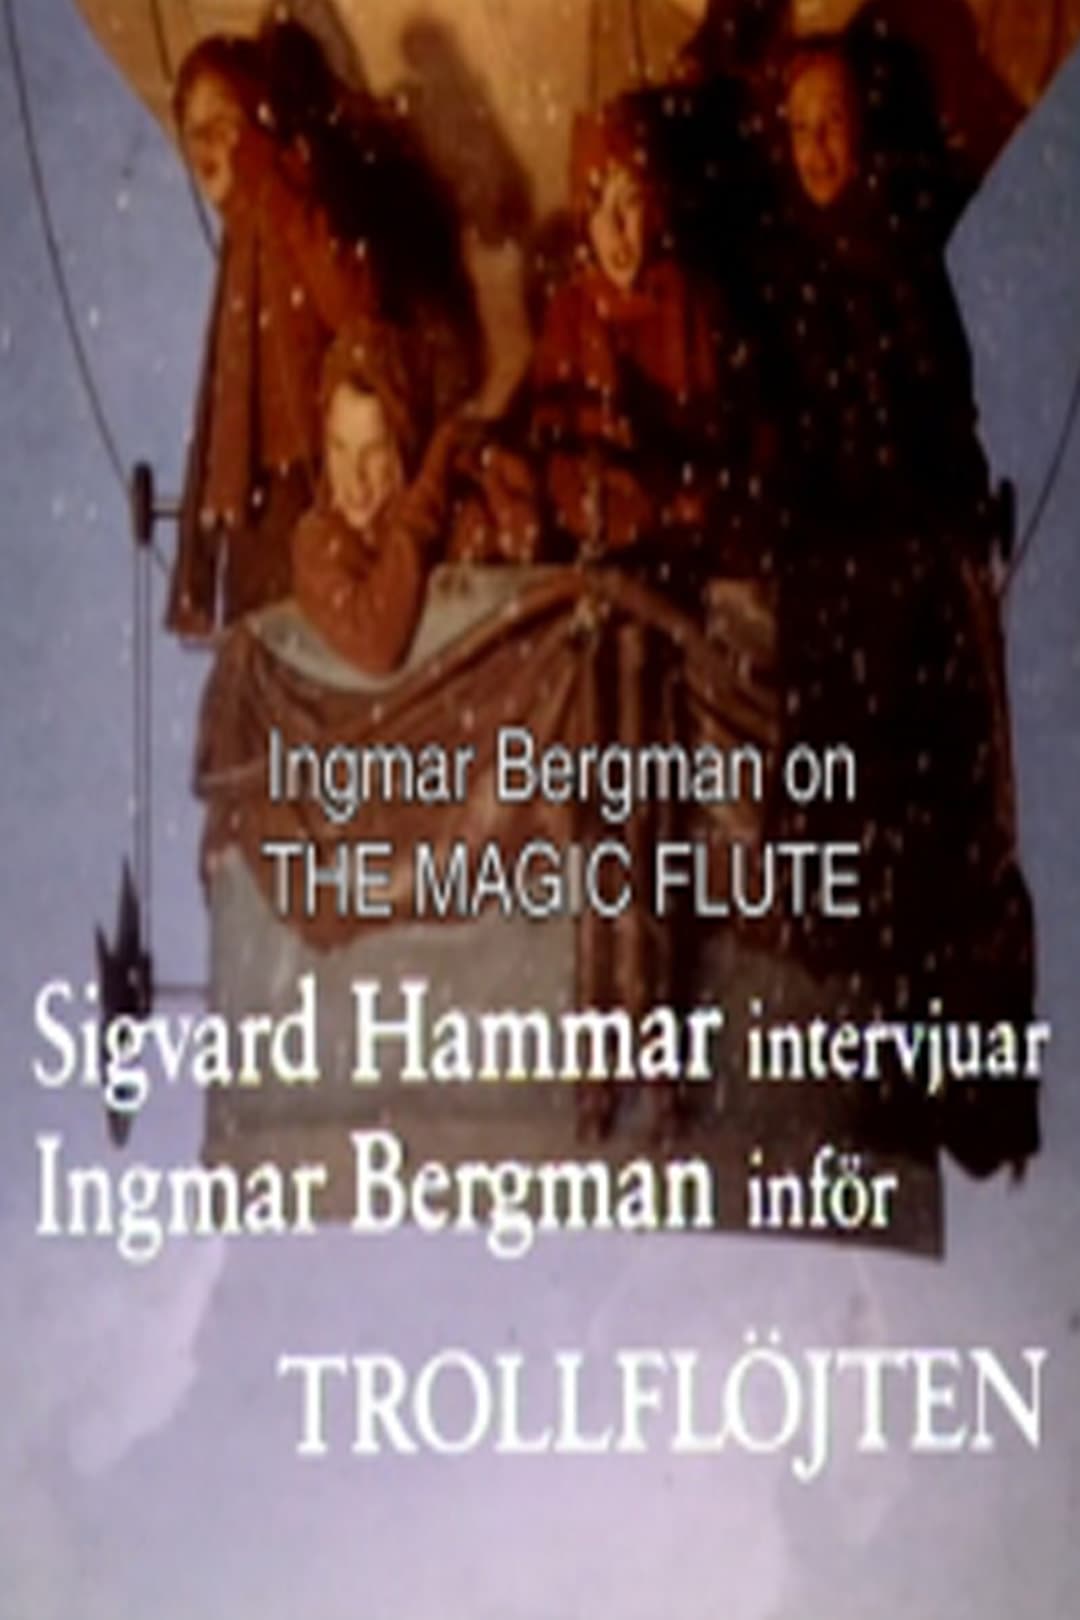 The Best Musical in the World: Ingmar Bergman on 'The Magic Flute'